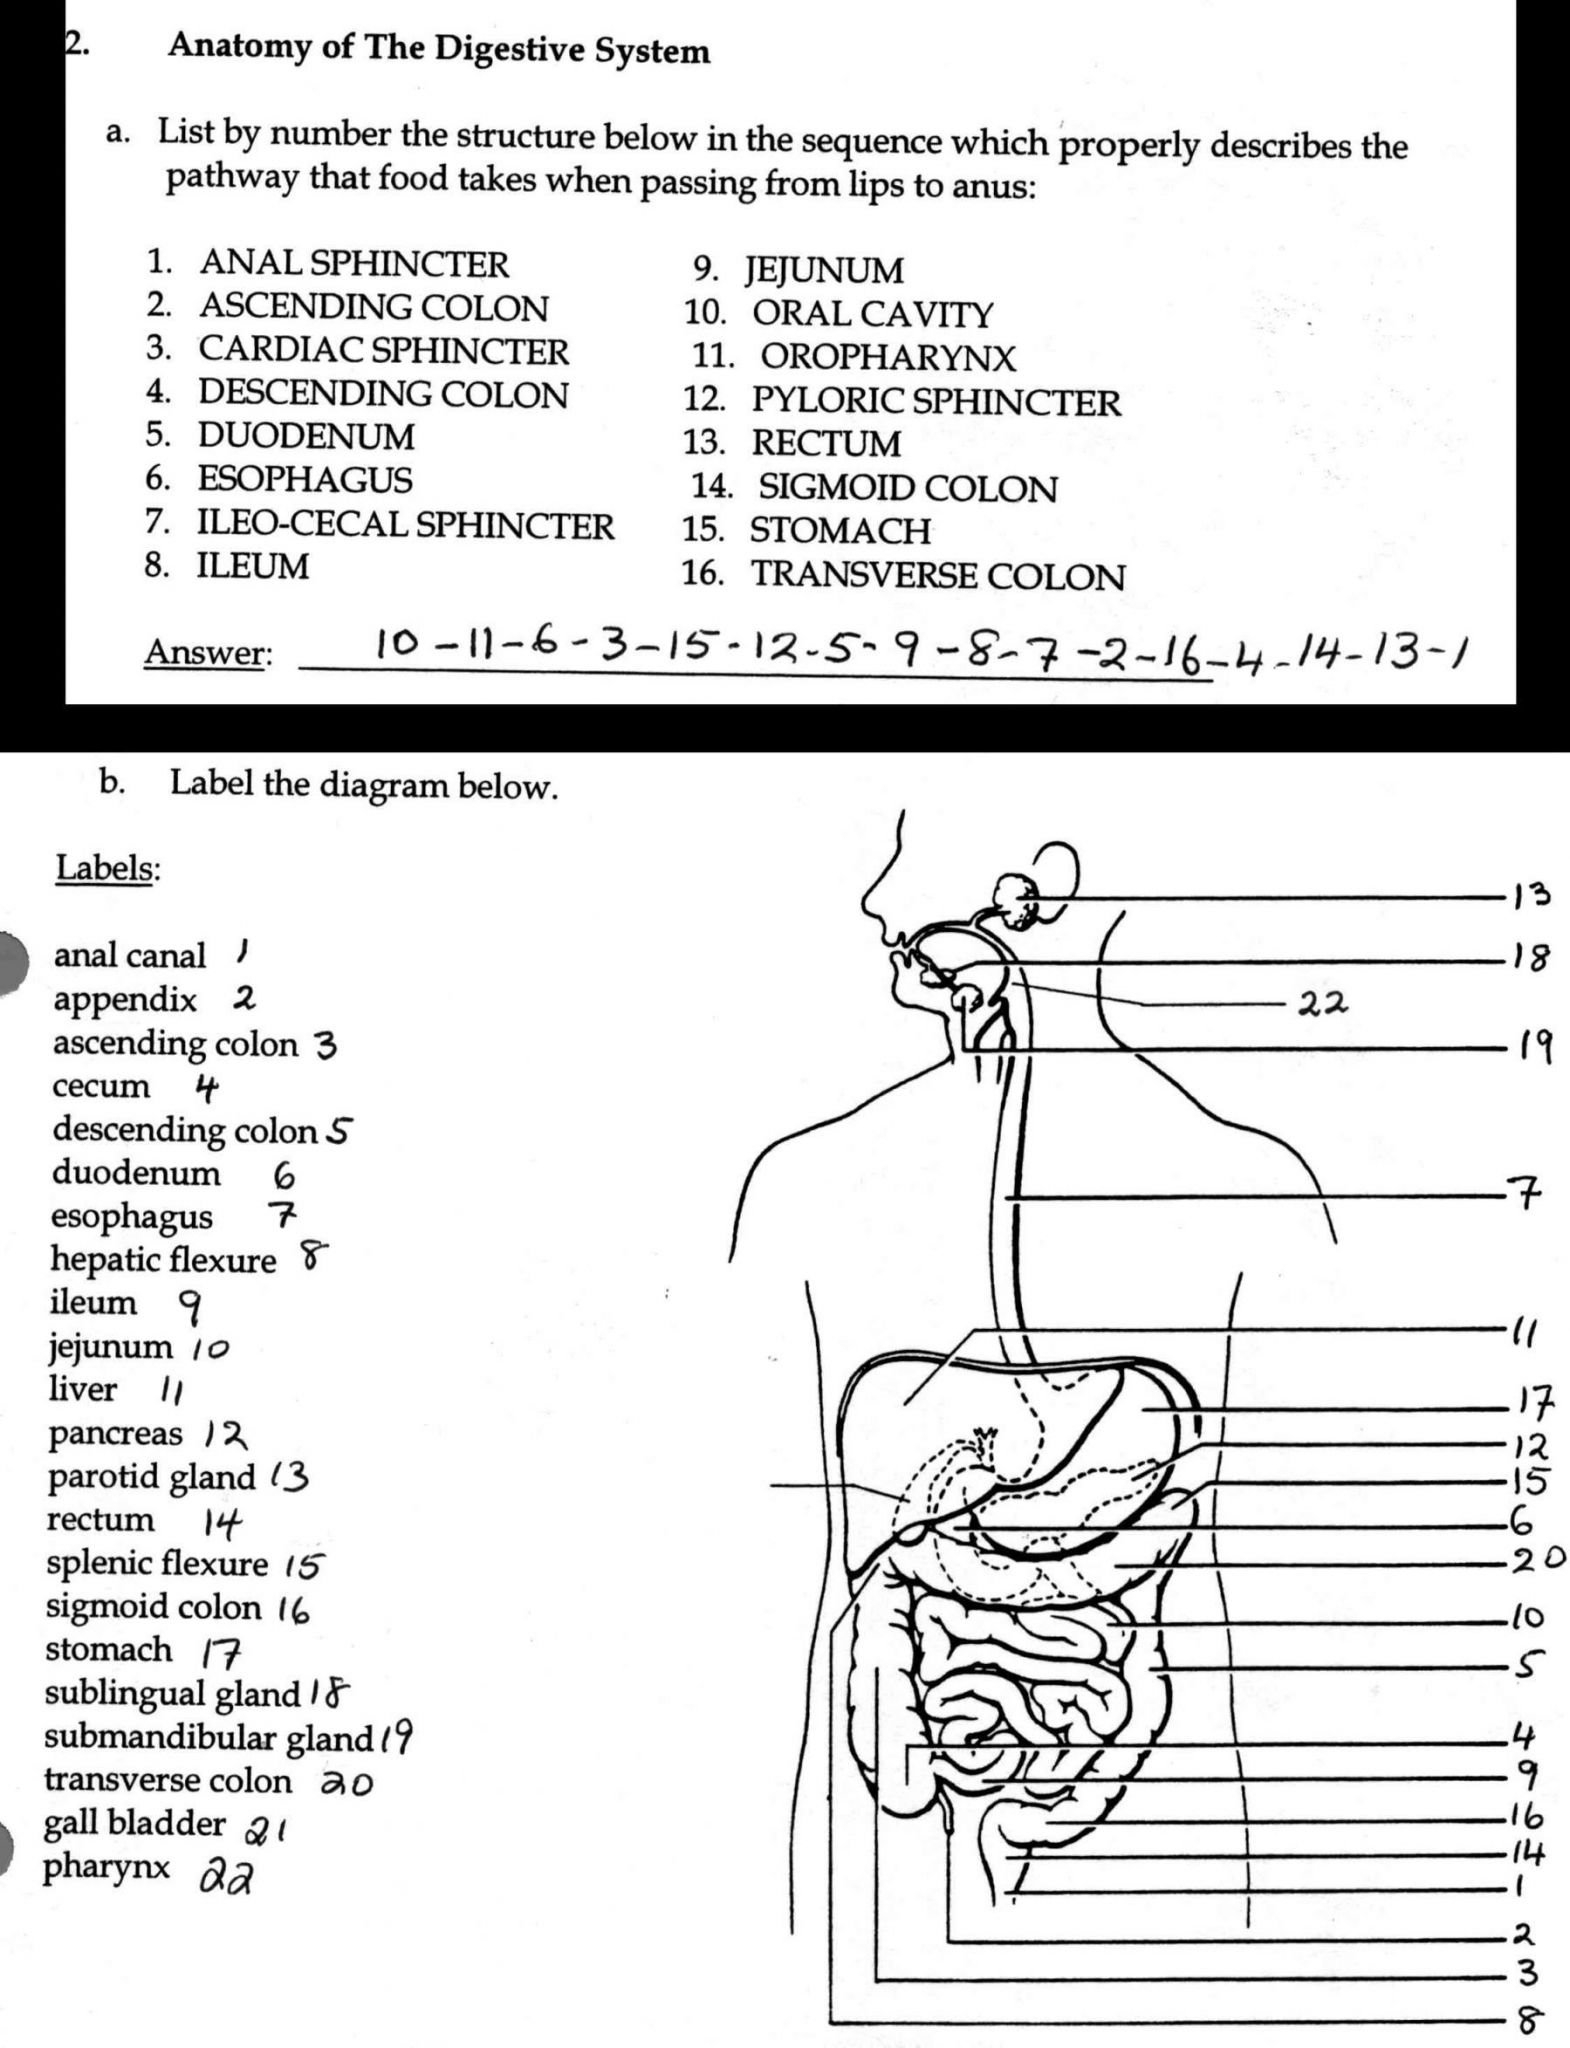 Chapter 11 The Cardiovascular System Worksheet Answer Key For Chapter 11 The Cardiovascular System Worksheet Answer Key